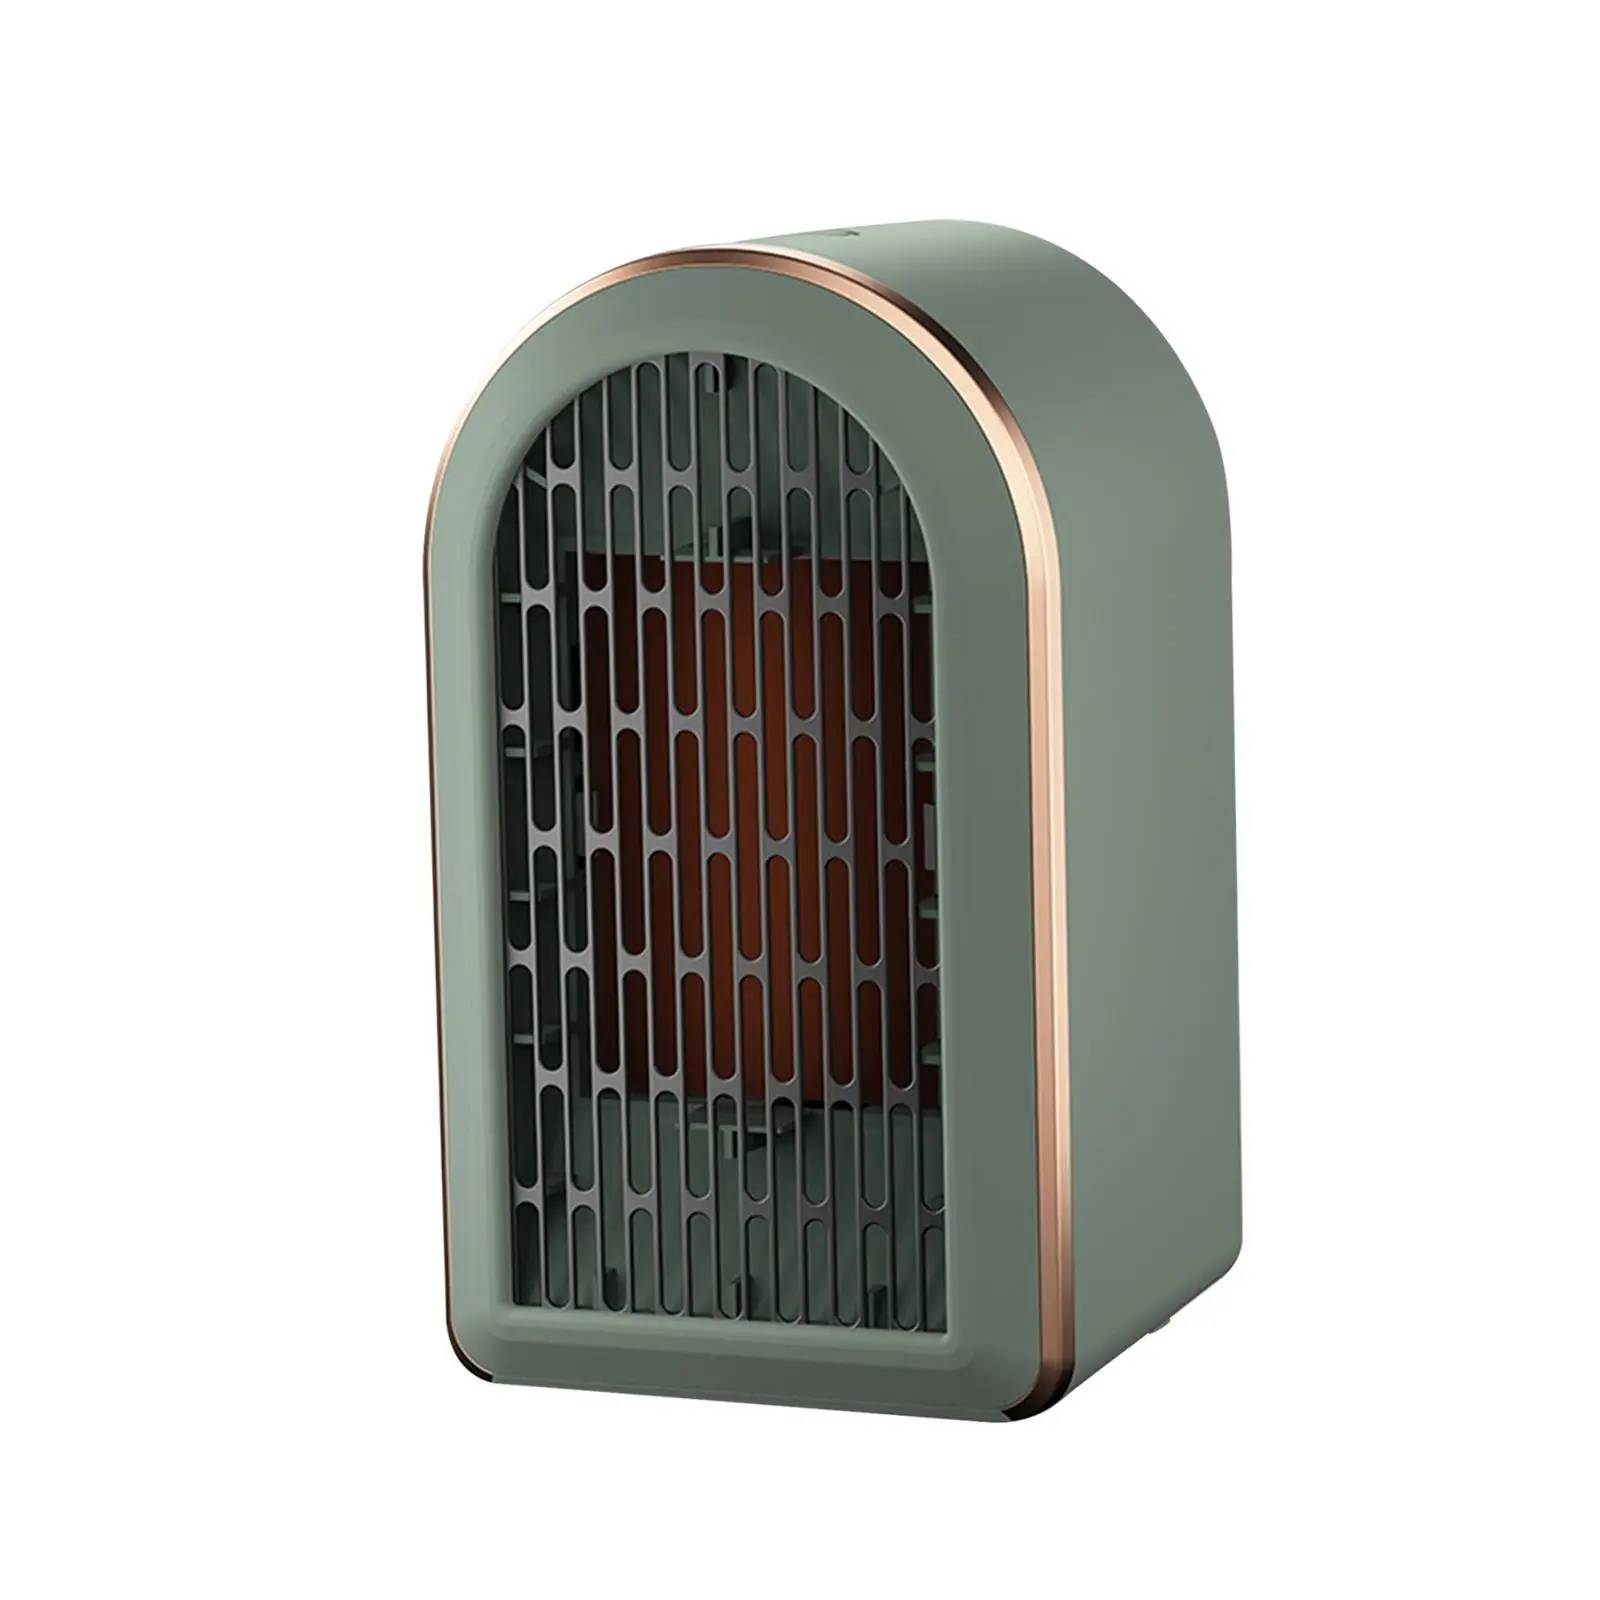 Electric Space Heater Portable Personal Heater with Thermostat Electric Space Heater for Dormitory Bedroom Desk Living Room Home